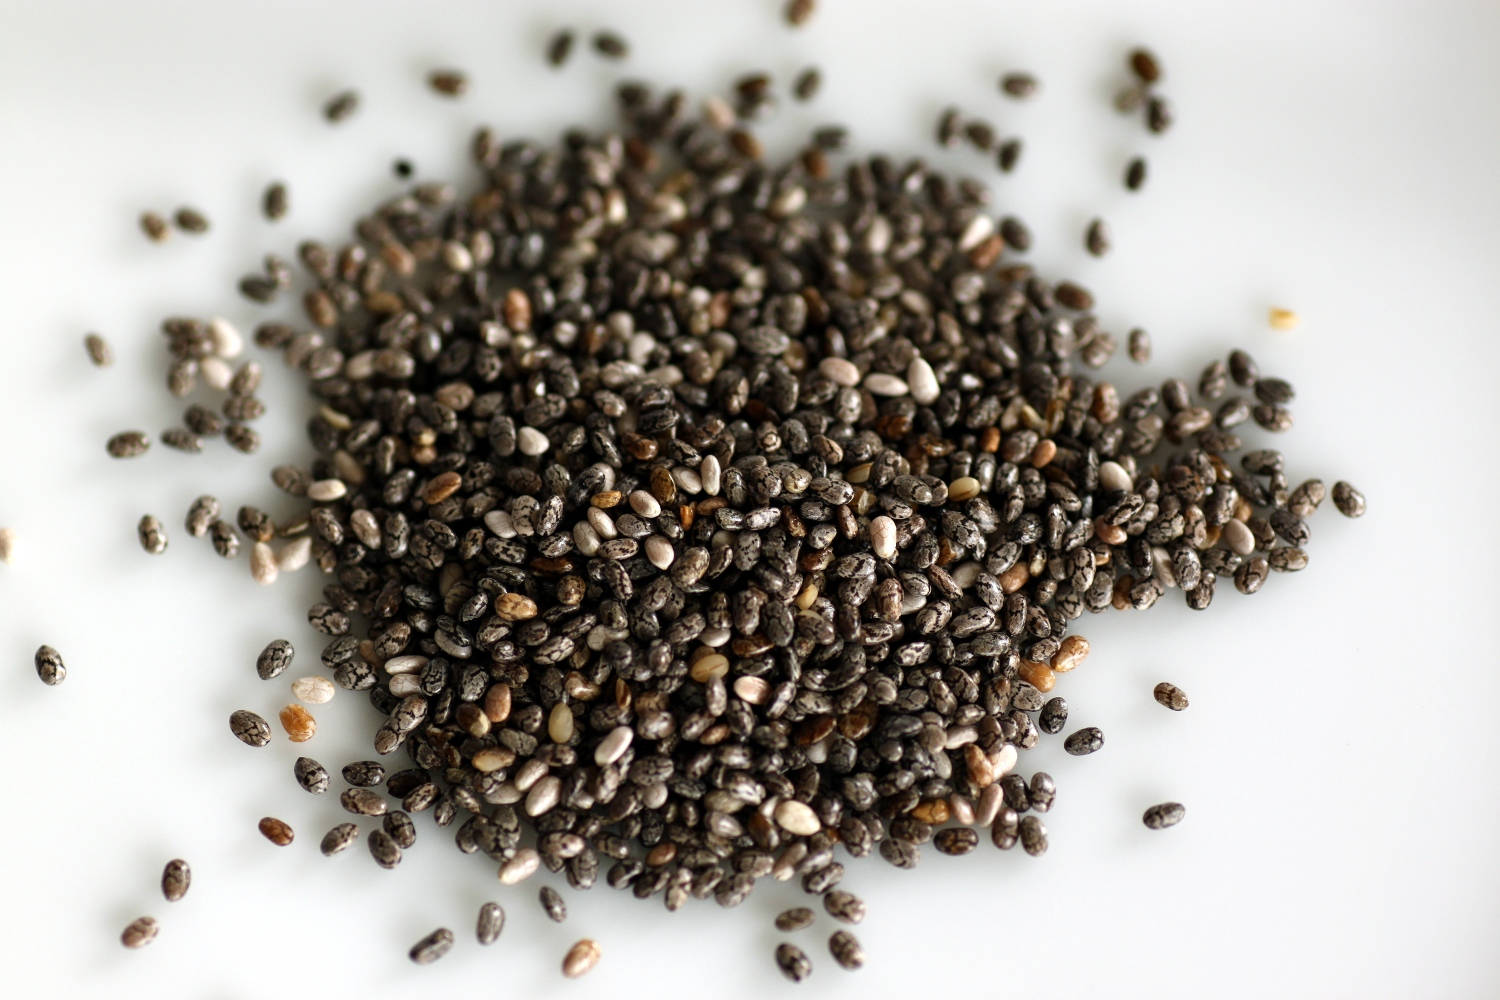 High-Quality Image of Nutritional Chia Seeds Wallpaper